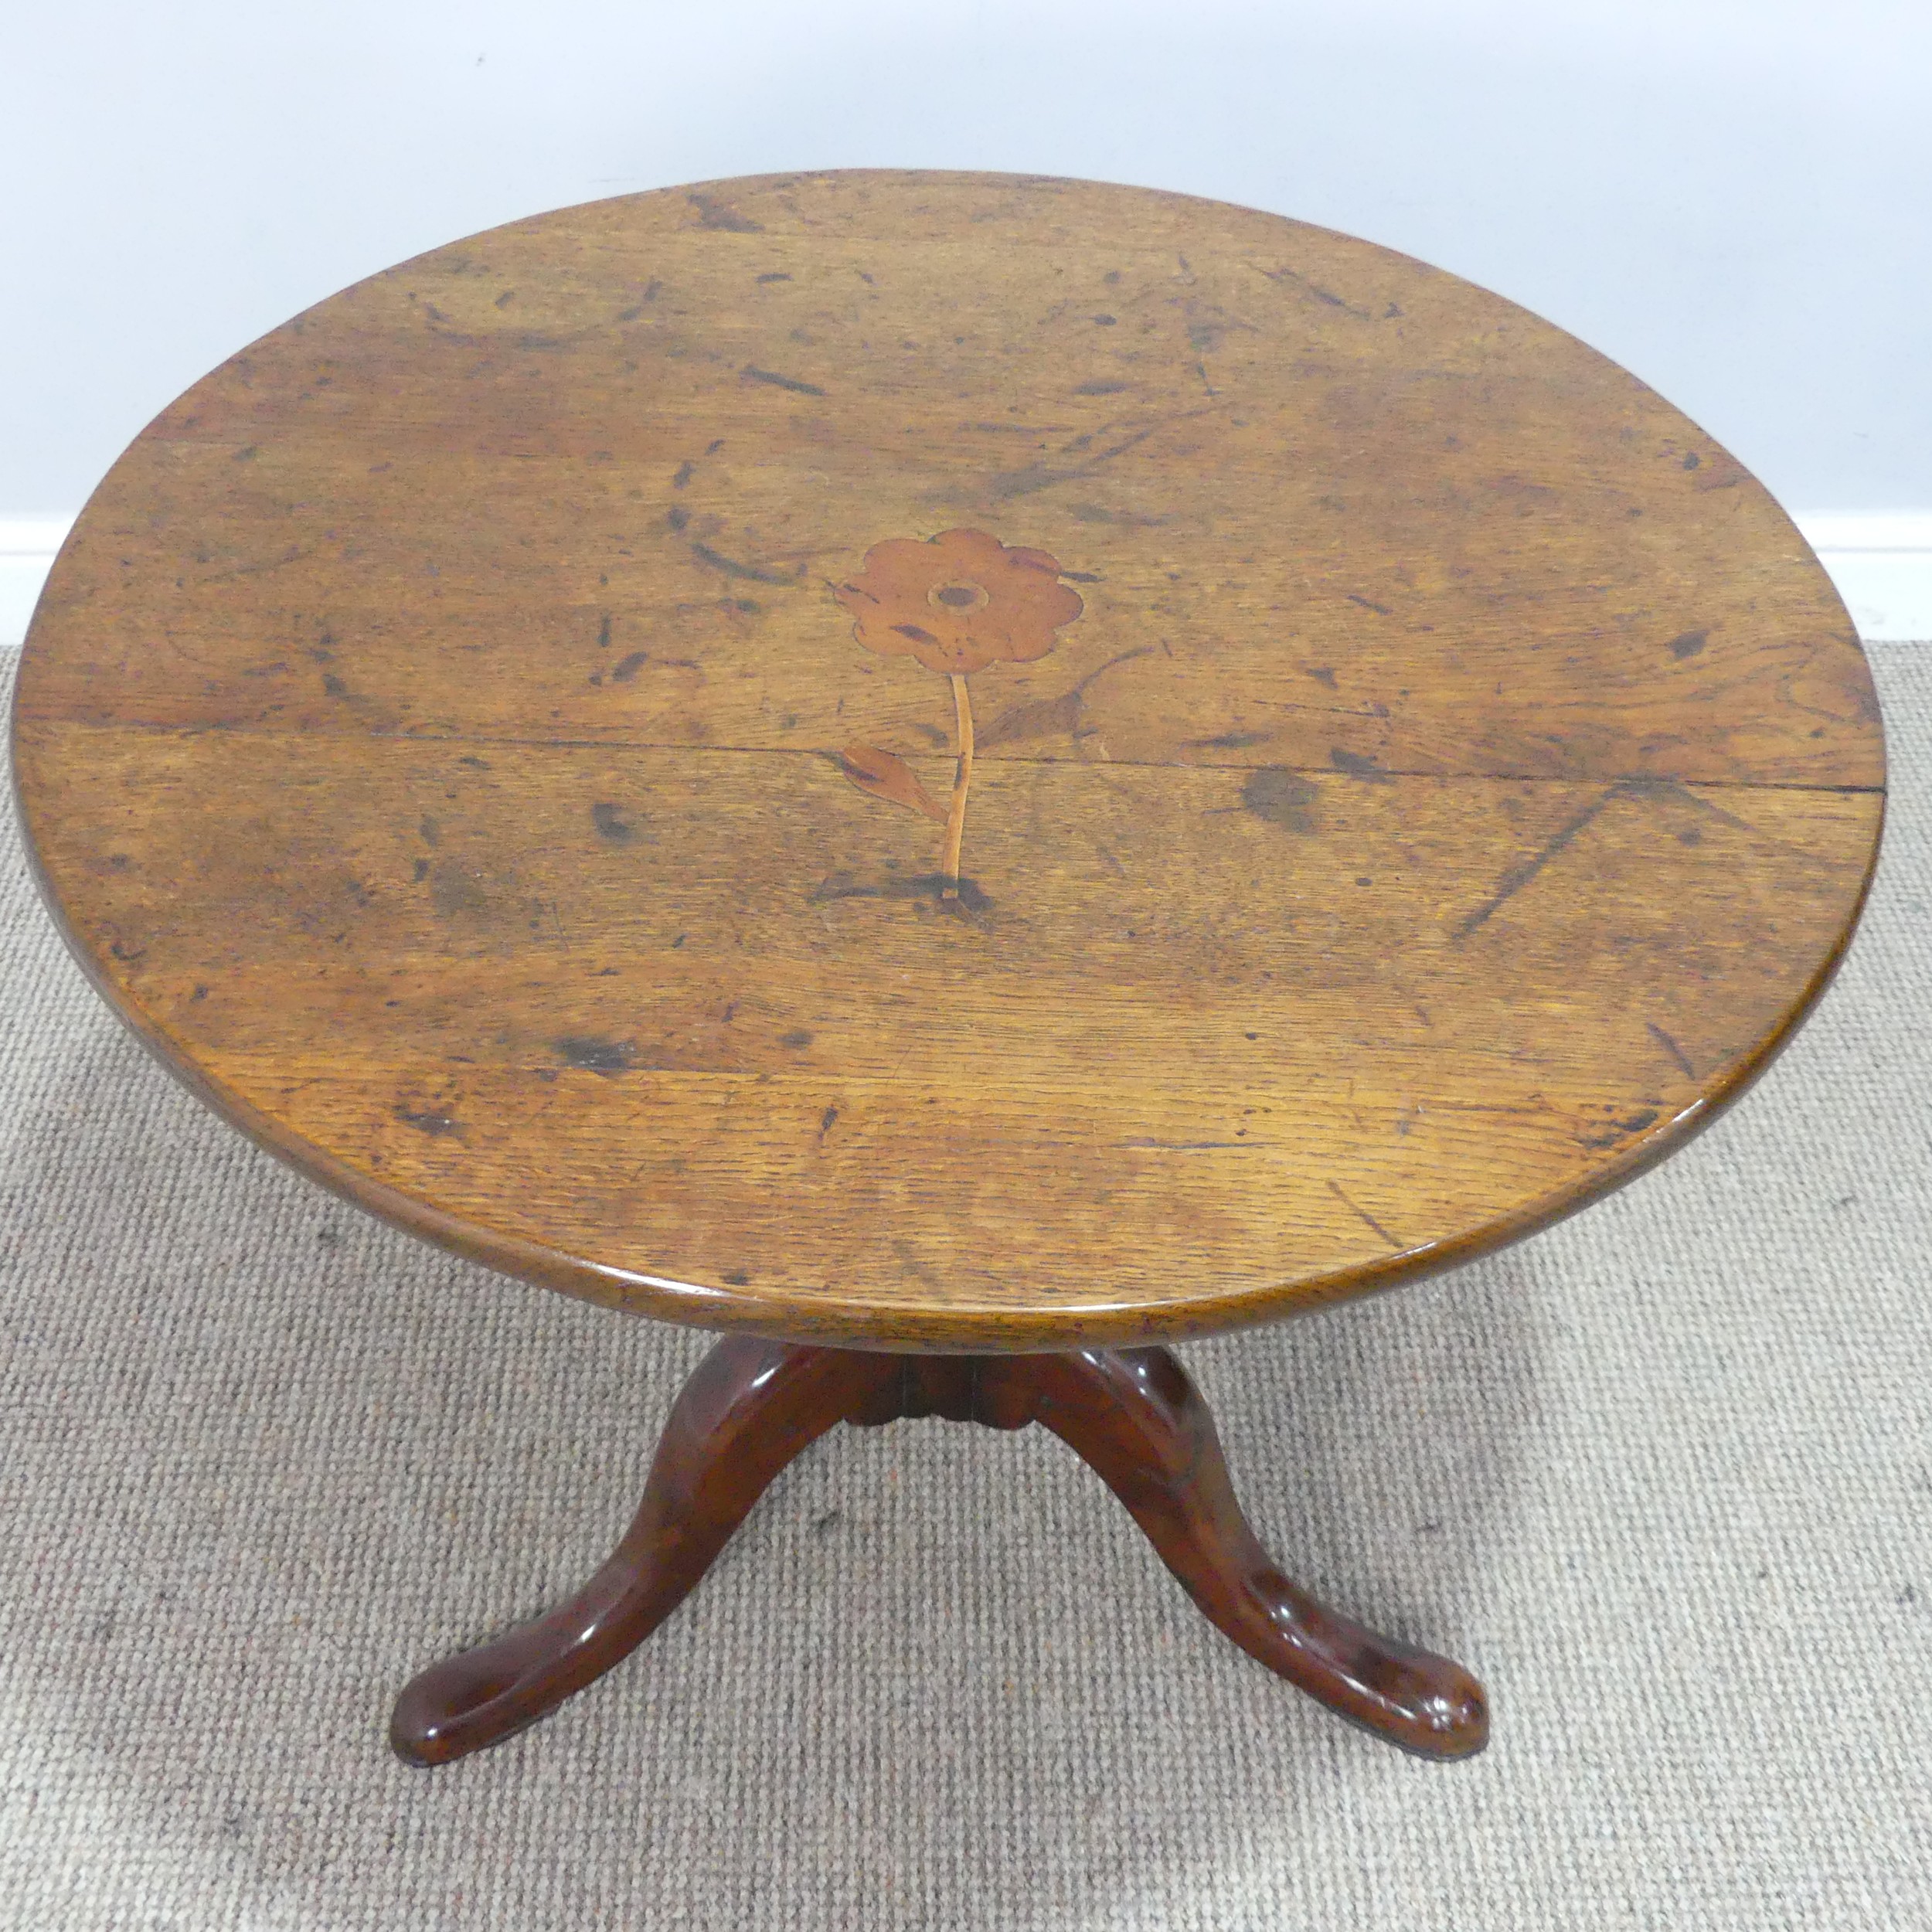 A 19th century oak tilt-top tripod Table, circular top with inlaid design of a flower, W 72.5 cm x H - Image 3 of 4